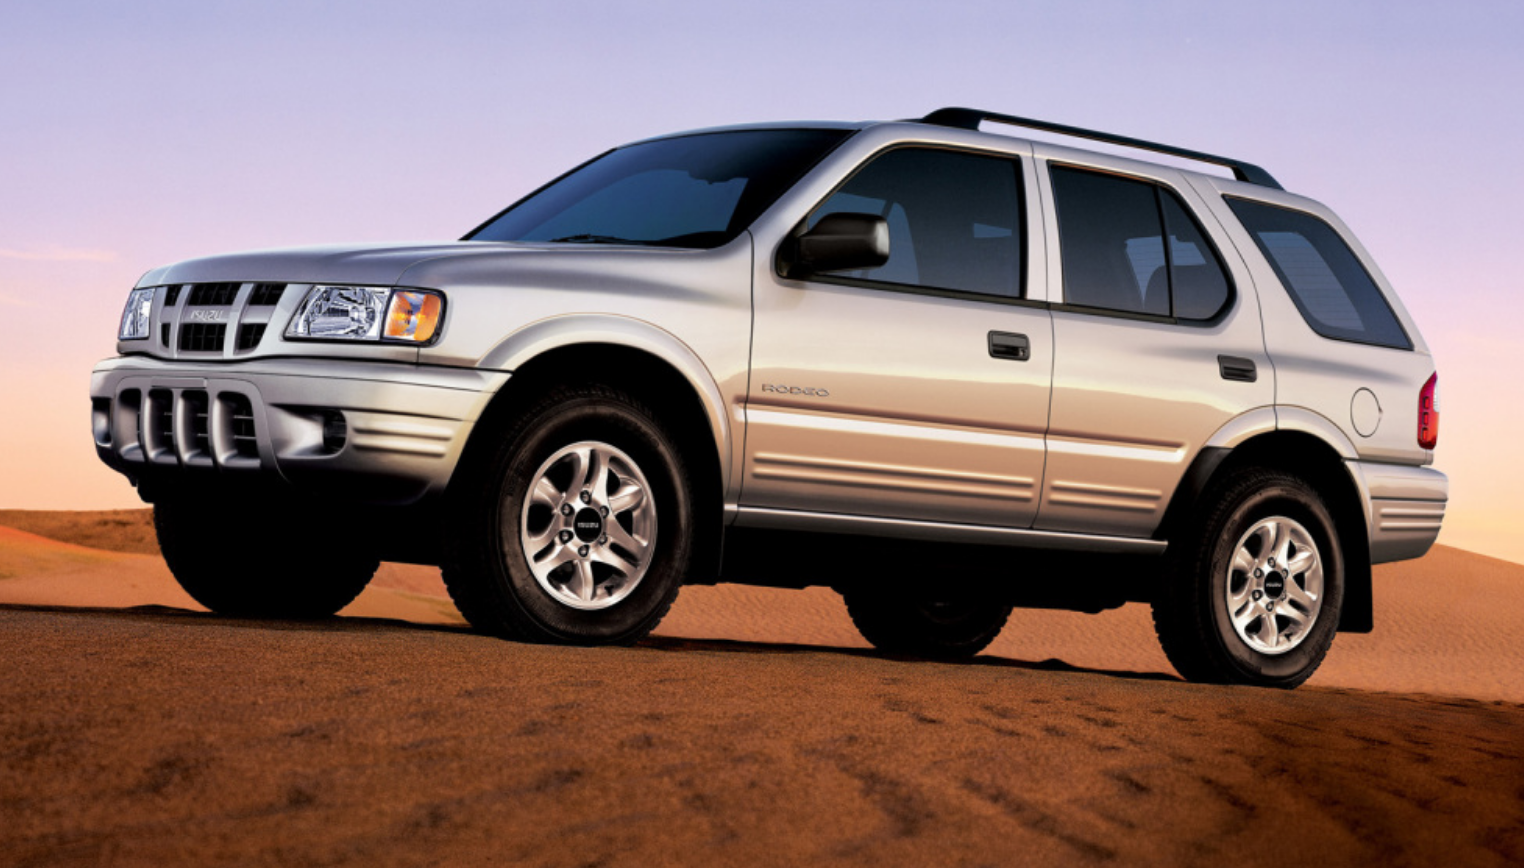 Quick Look: 2004 Isuzu Rodeo | The Daily Drive | Consumer Guide® The